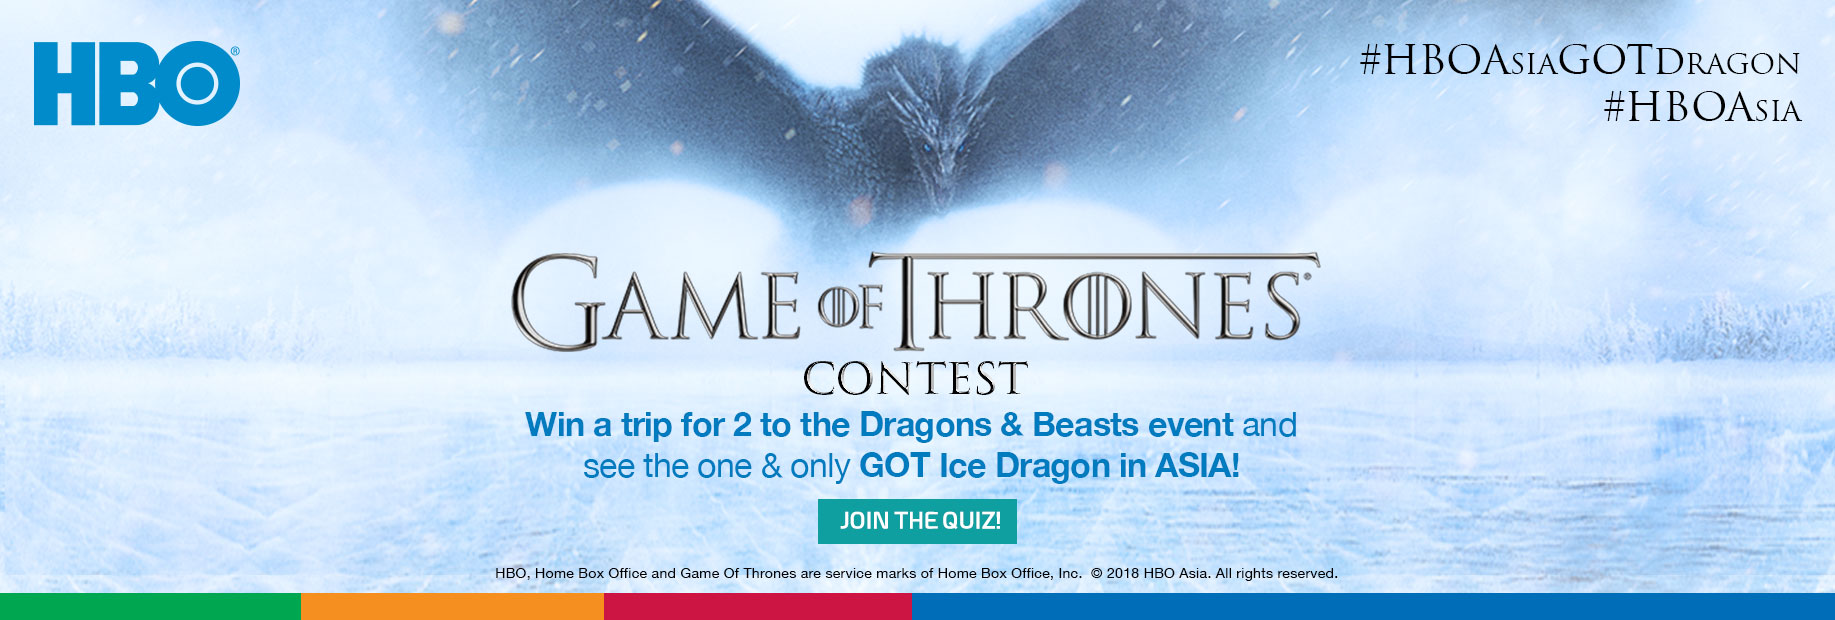 HBO GOT Flyaway to Singapore Contest